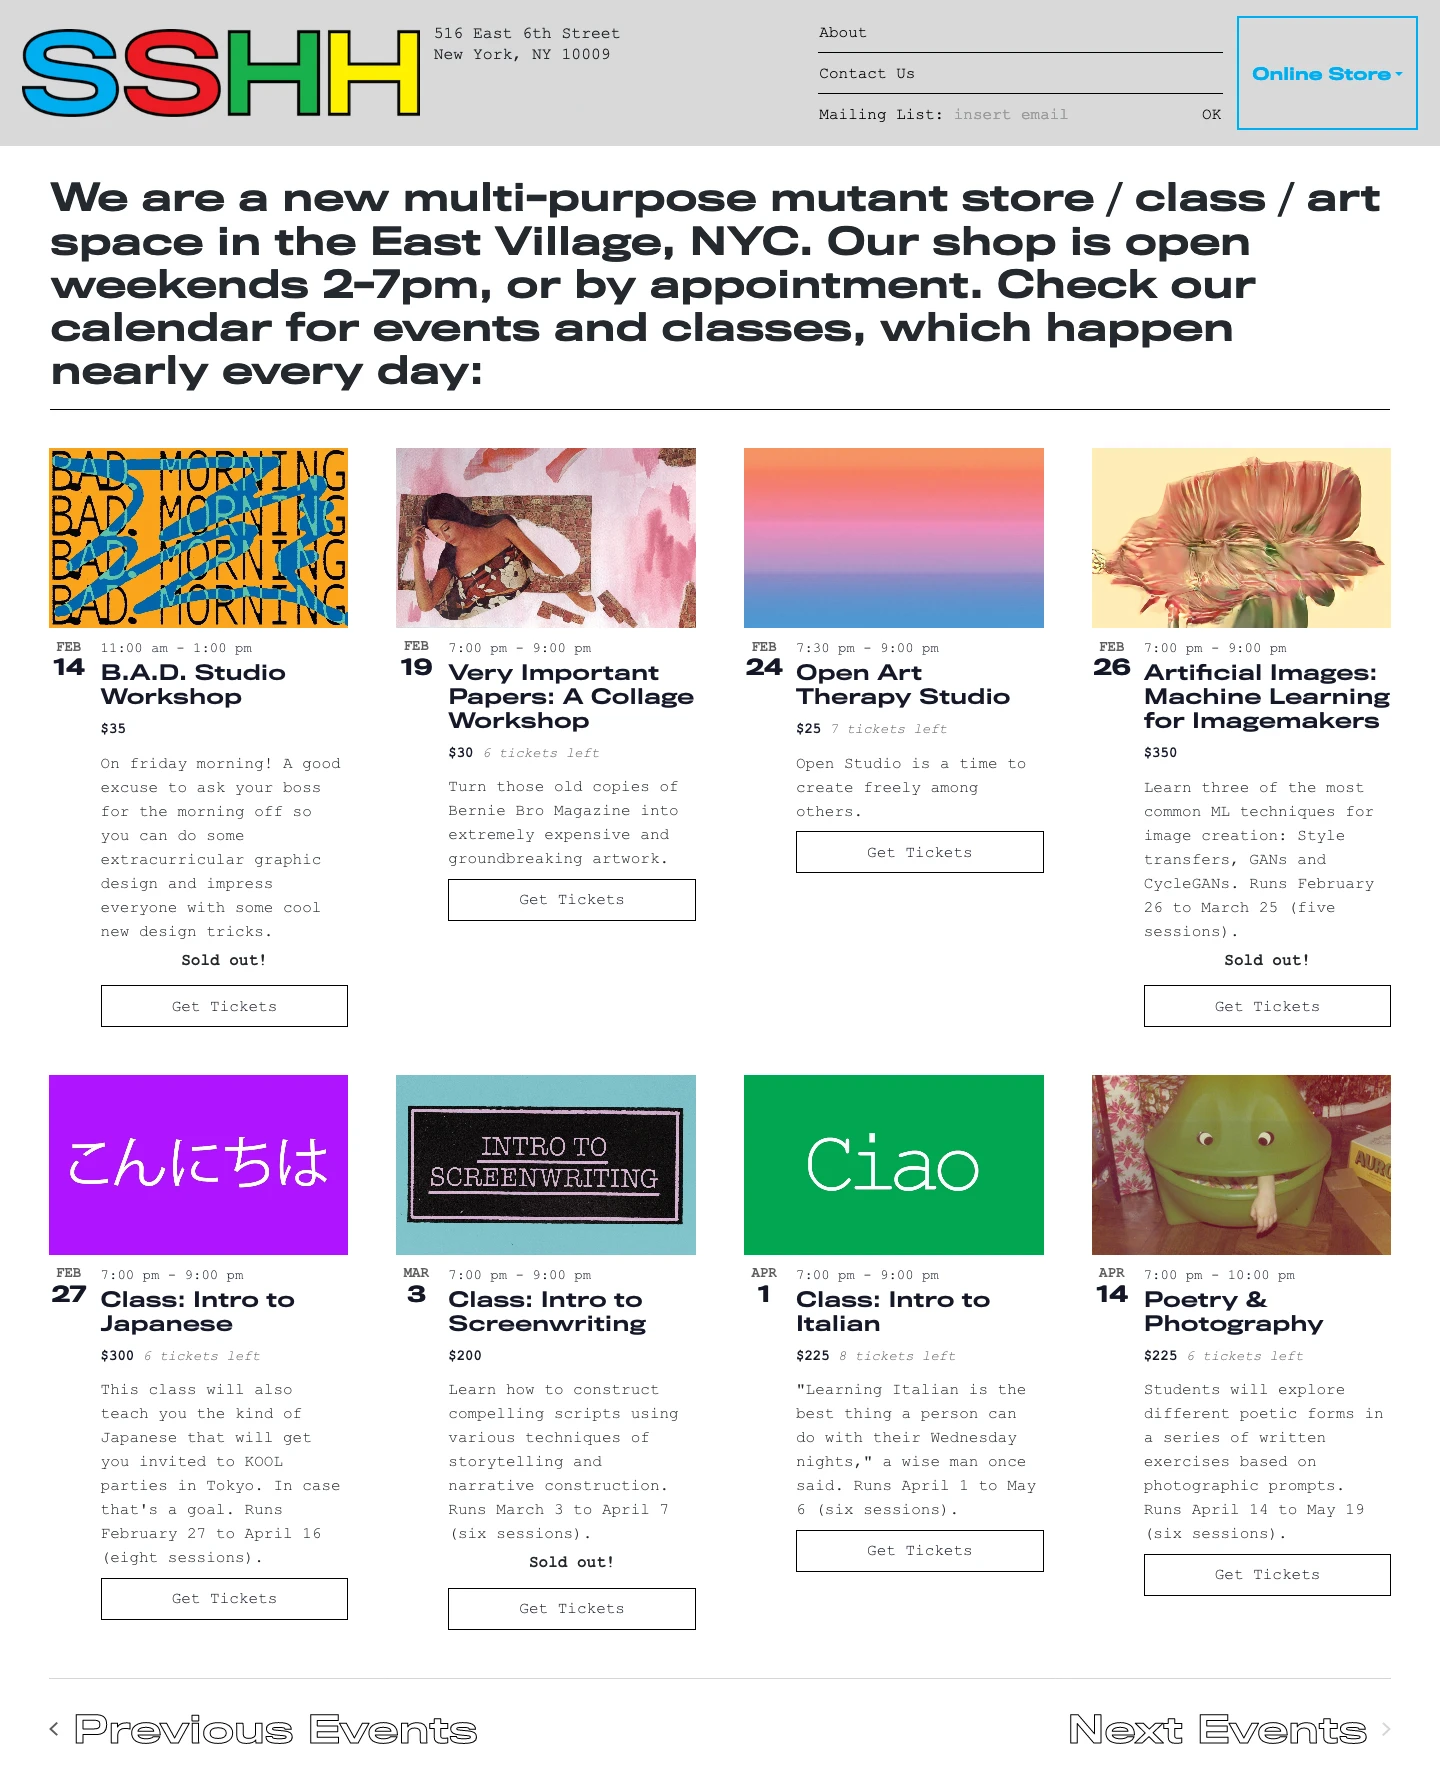 SSHH Landing Page Example: We are a new multi-purpose mutant store / class / art space in the East Village, NYC. Our shop is open weekends 2-7pm, or by appointment. Check our calendar for events and classes, which happen nearly every day.